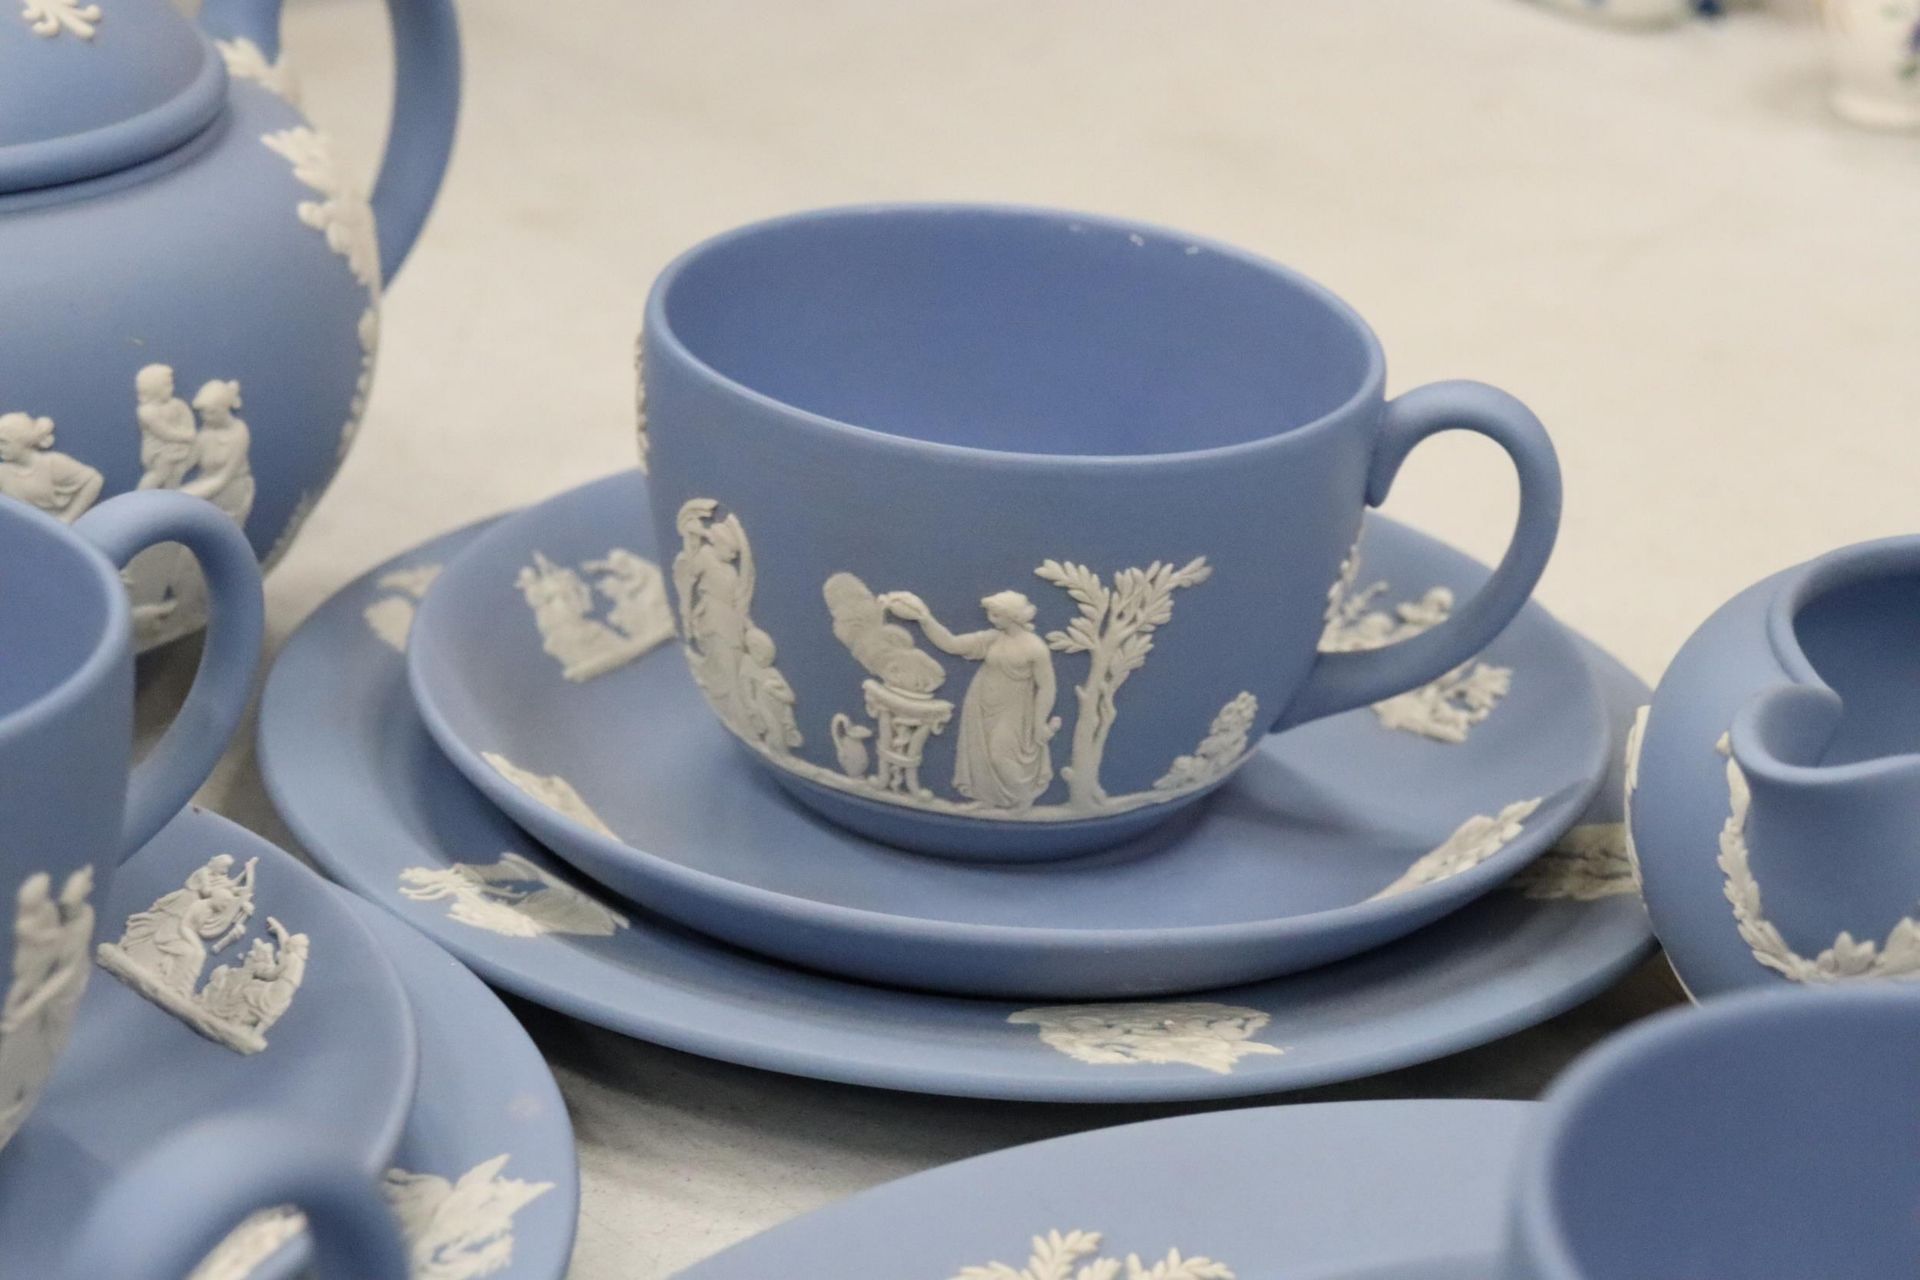 A WEDGWOOD JASPERWARE TEASET TO INCLUDE A TEAPOT, CREAM JUG, SUGAR BOWL,CUPS, SAUCERS, SIDE PLATES - Image 6 of 8